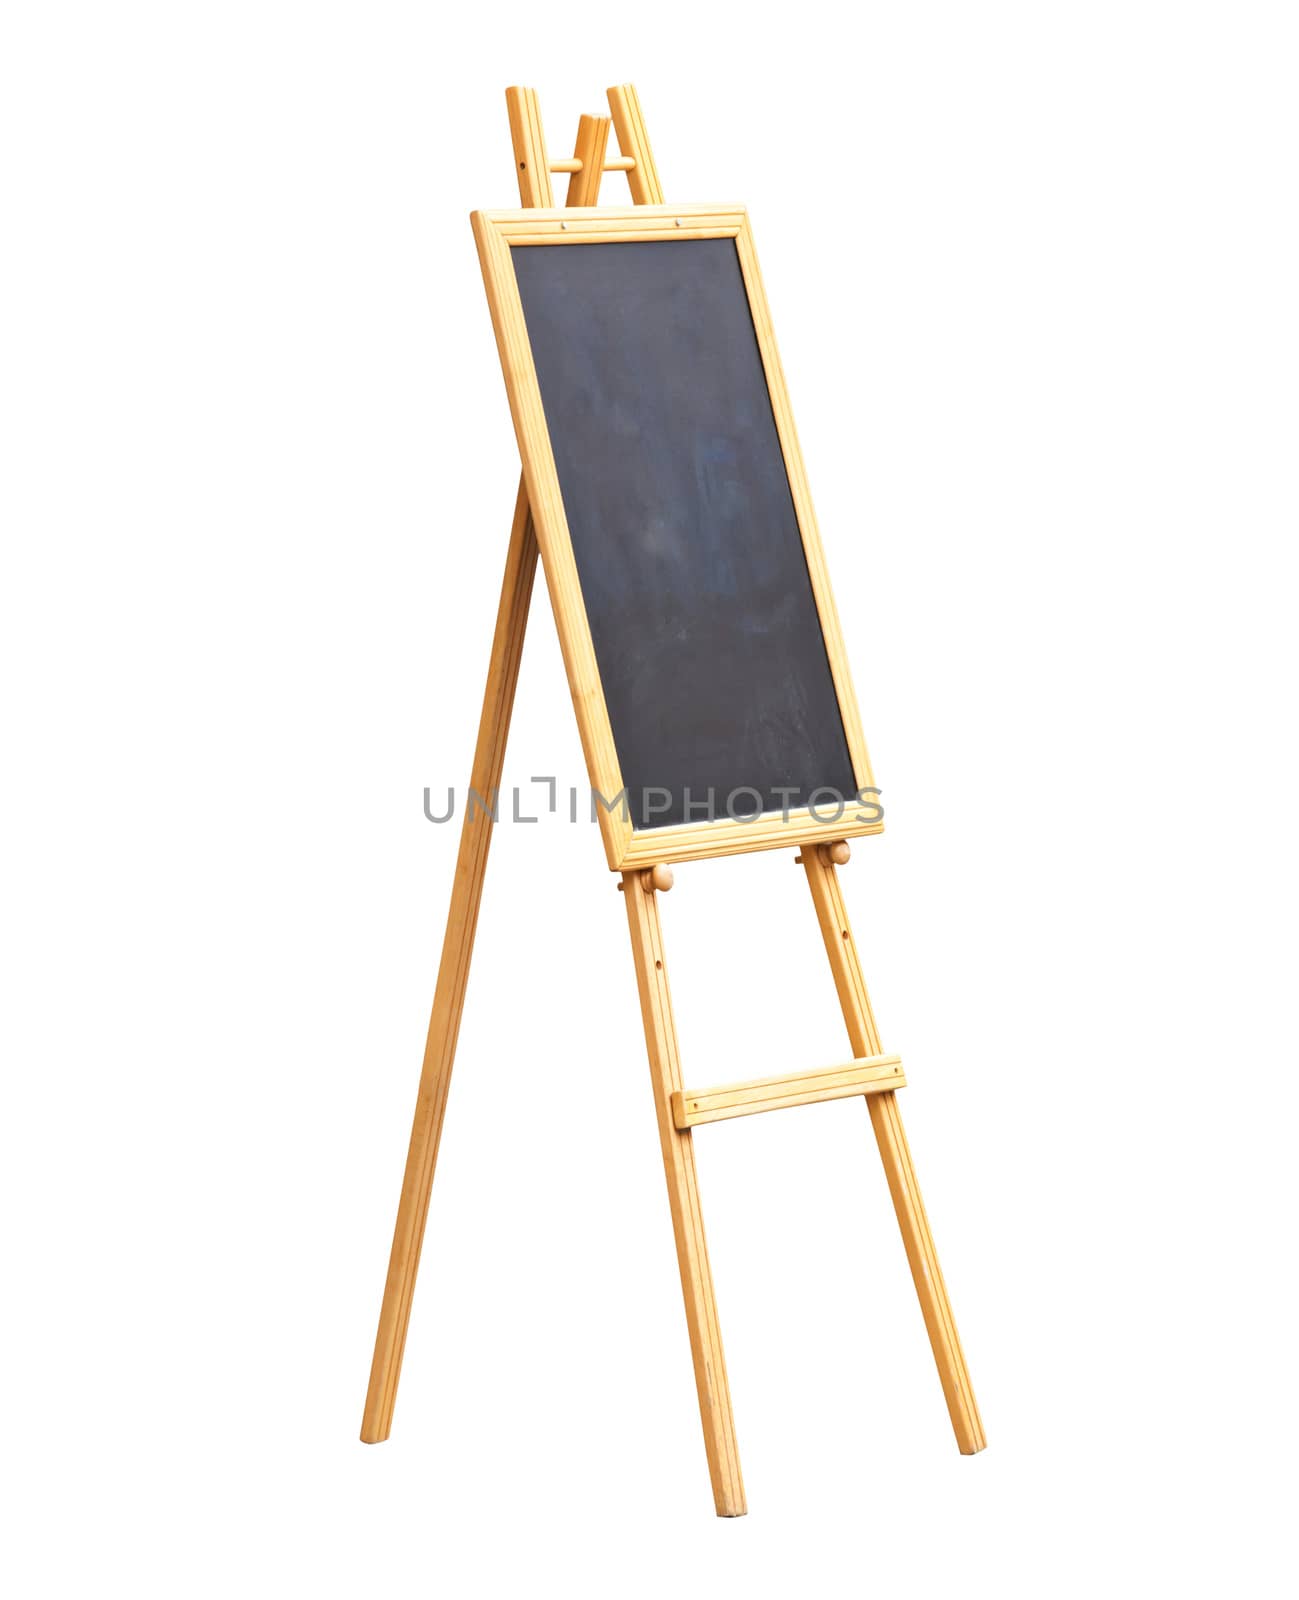 Chalkboard in wooden frame isolated on white background